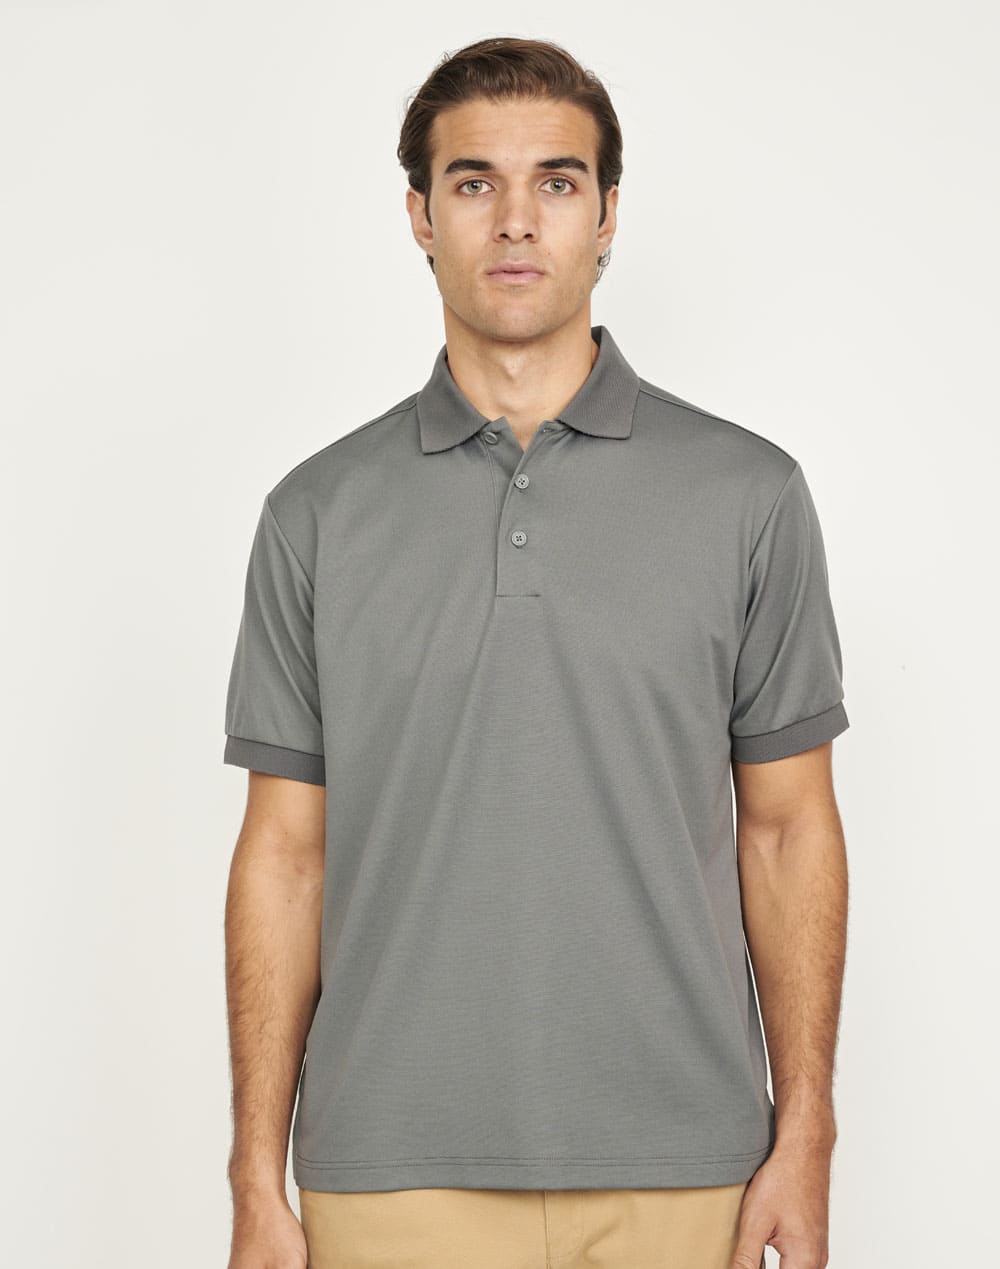 Customized Men's Corporate Branded Polo Shirts Online Perth Australia